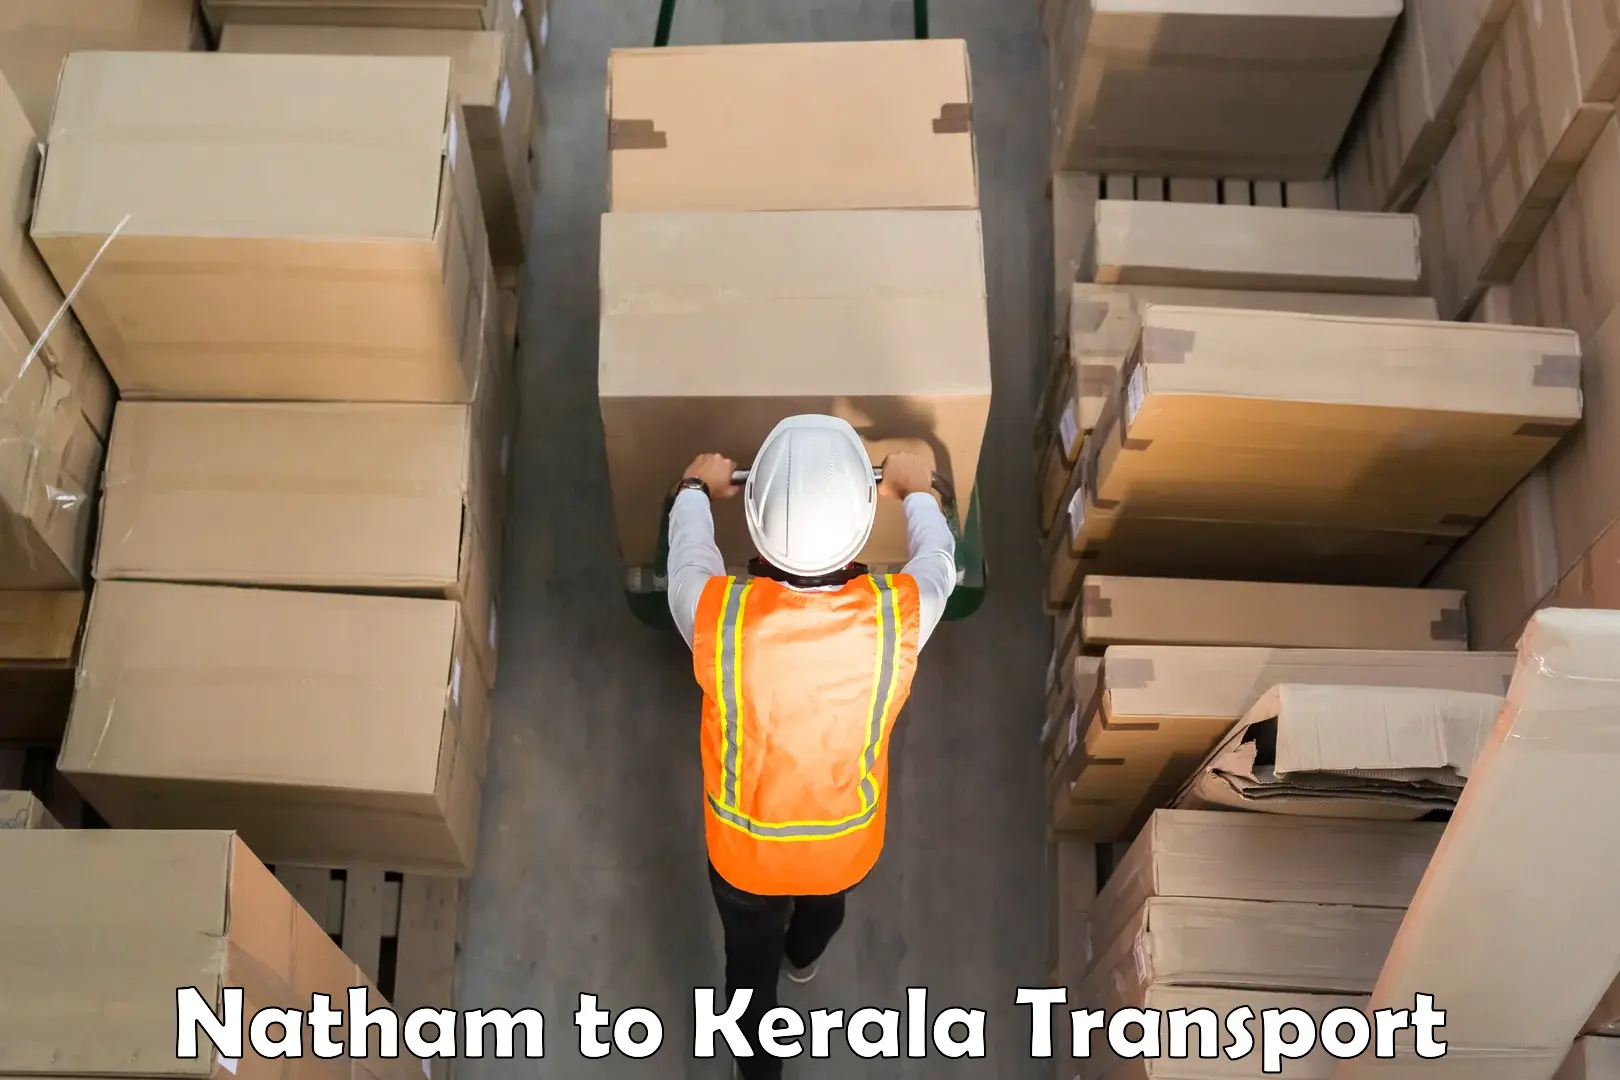 Delivery service Natham to Kerala